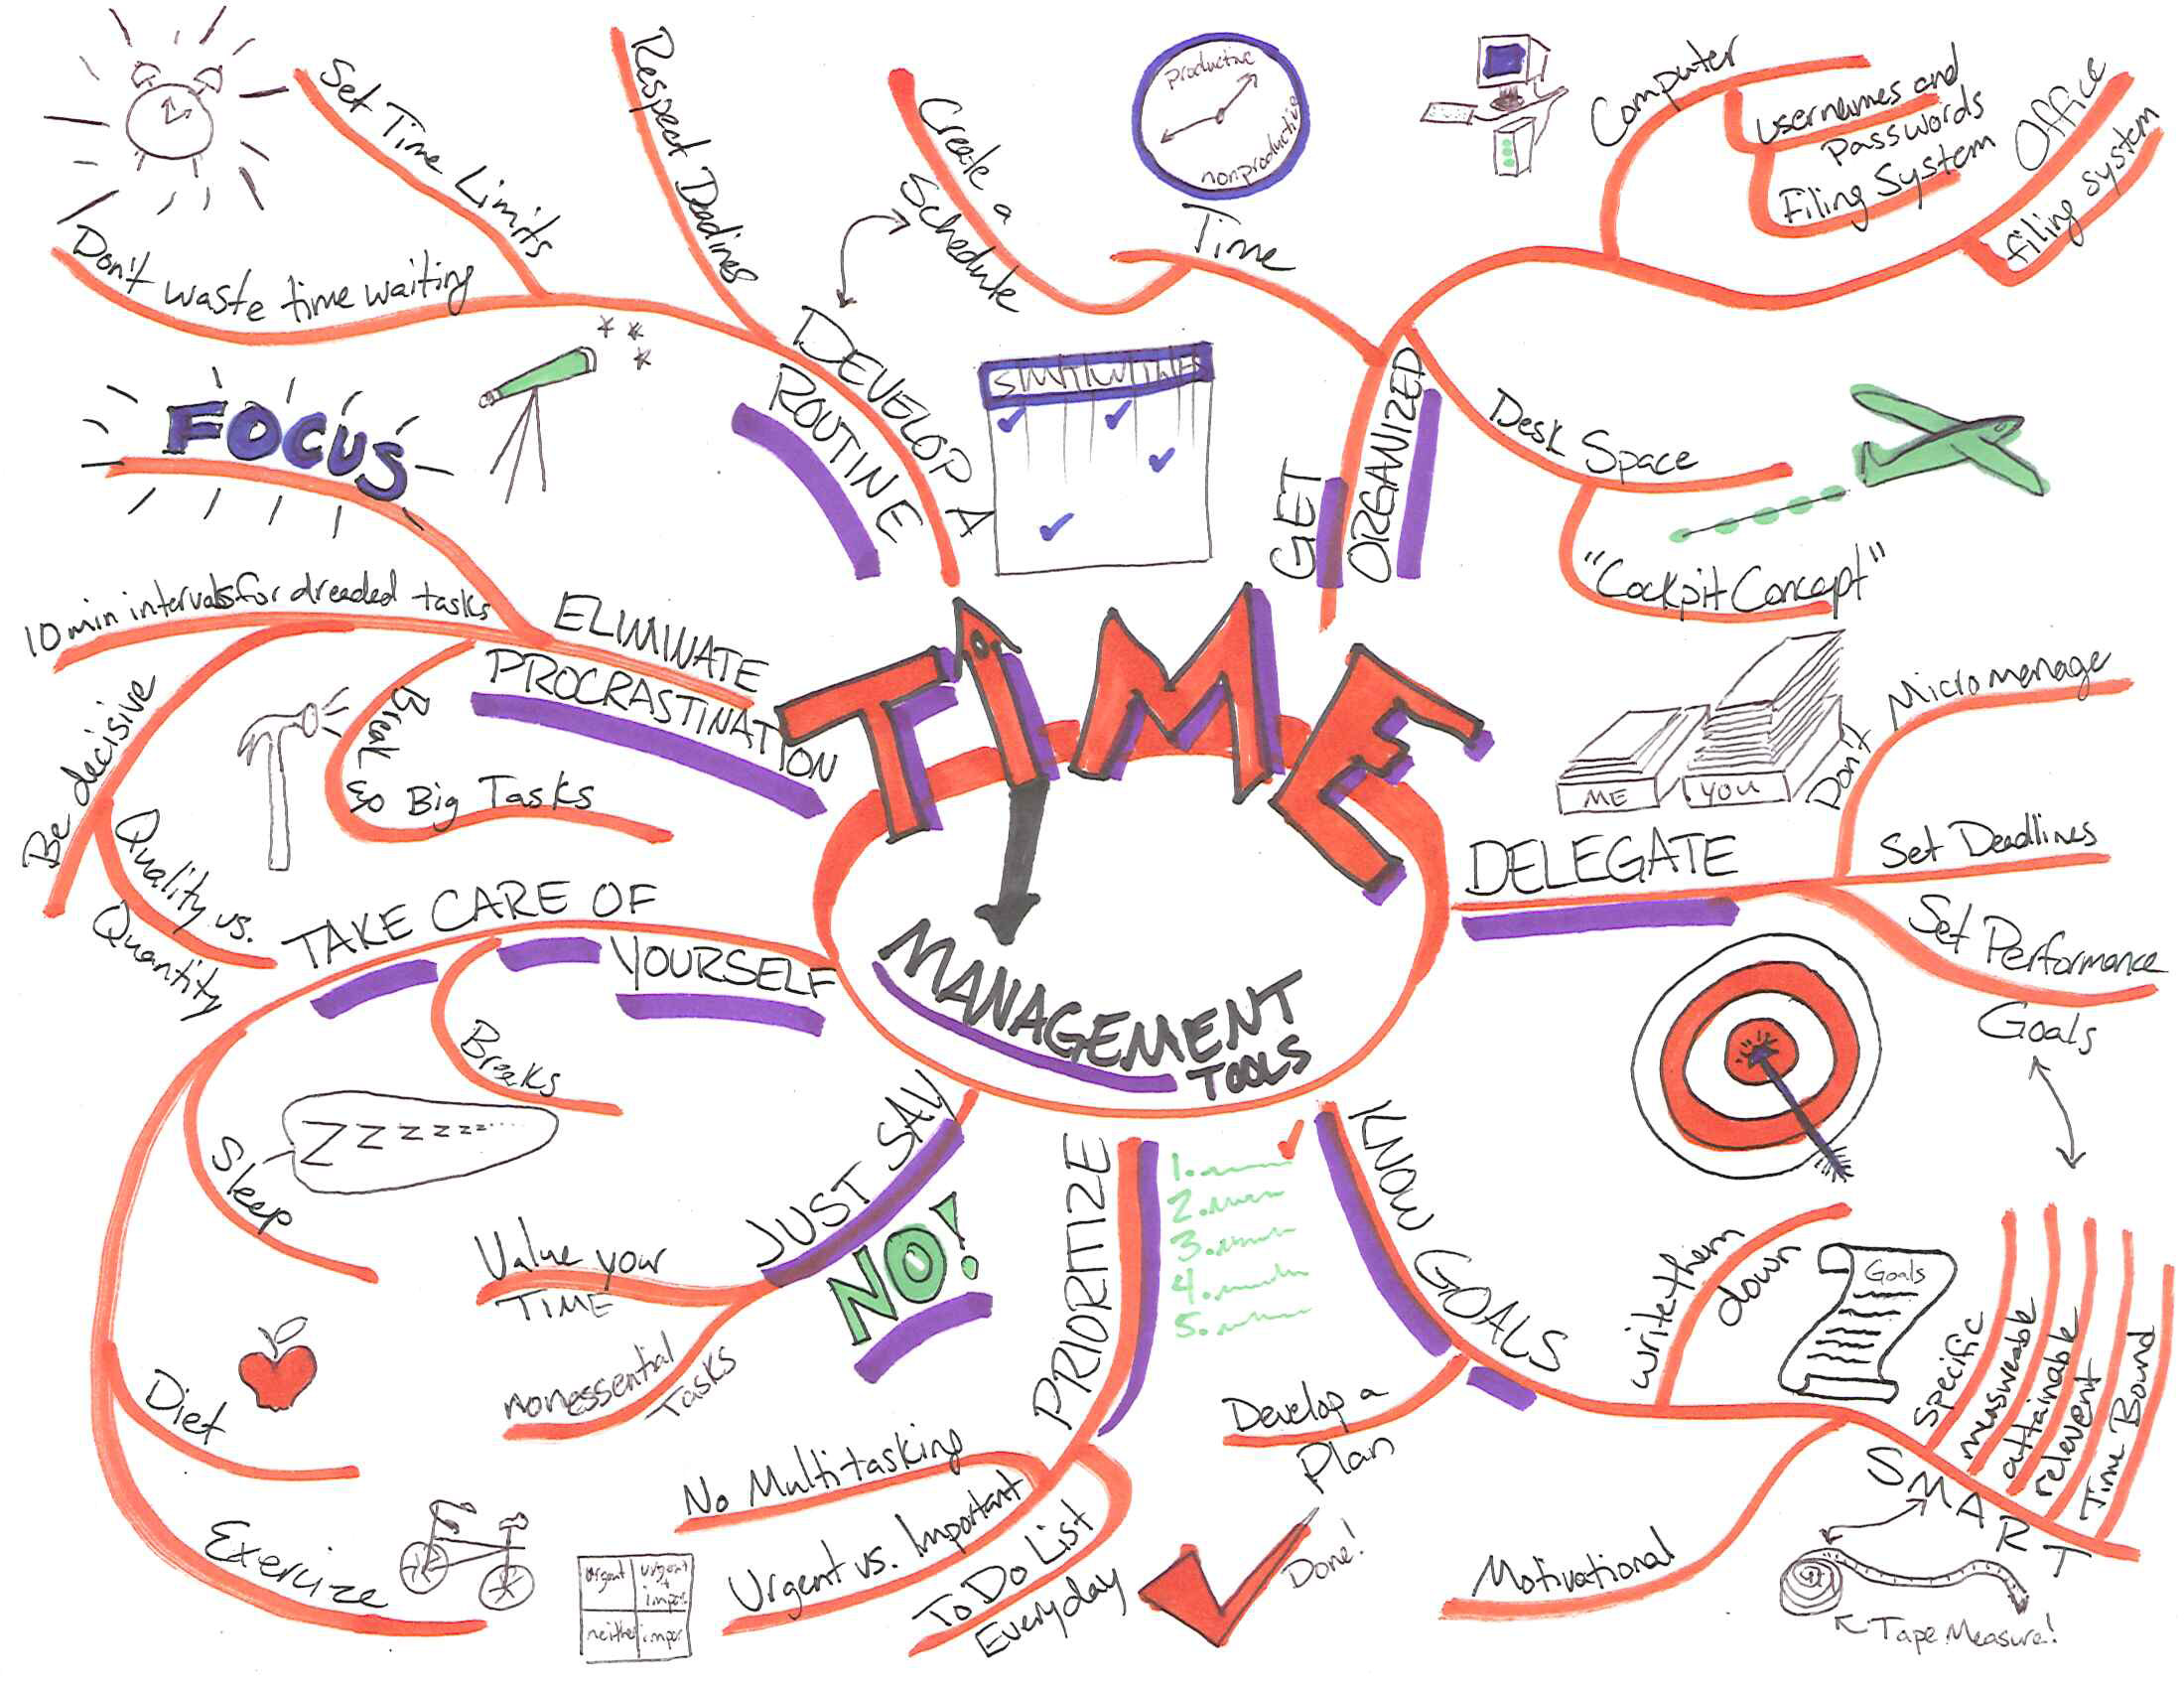  to keep in mind when developing your mind map. This is the fun part